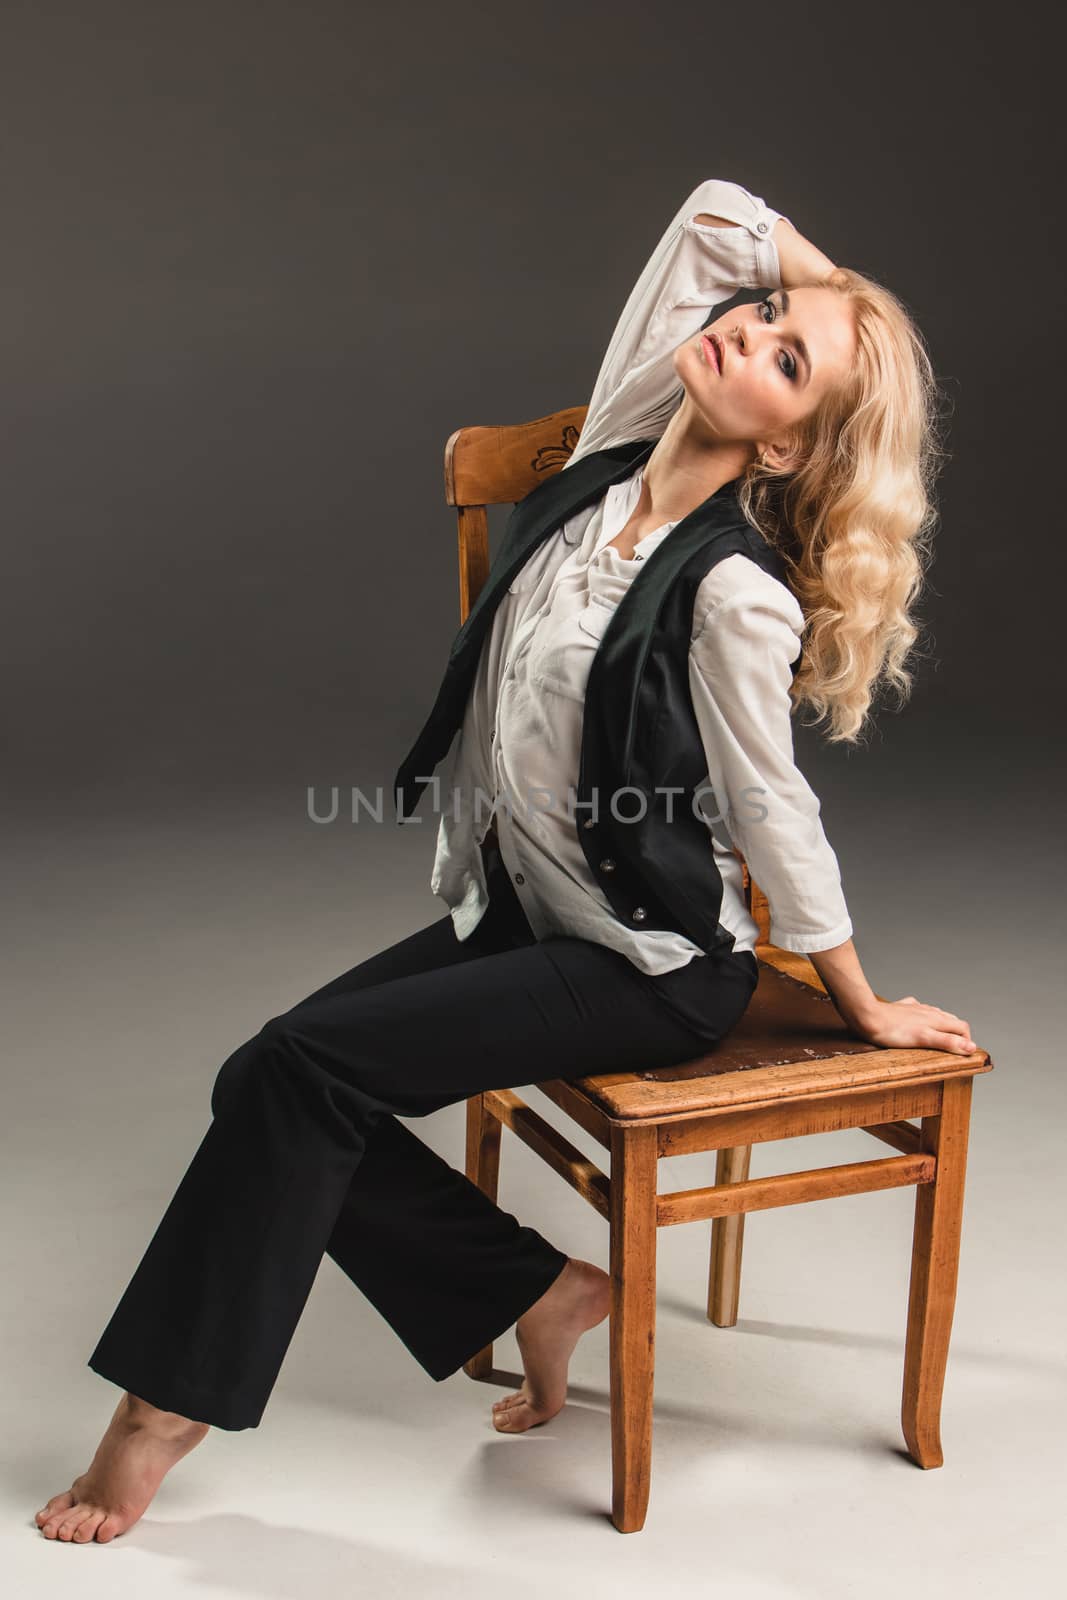 Beauty blond woman on chair by master1305